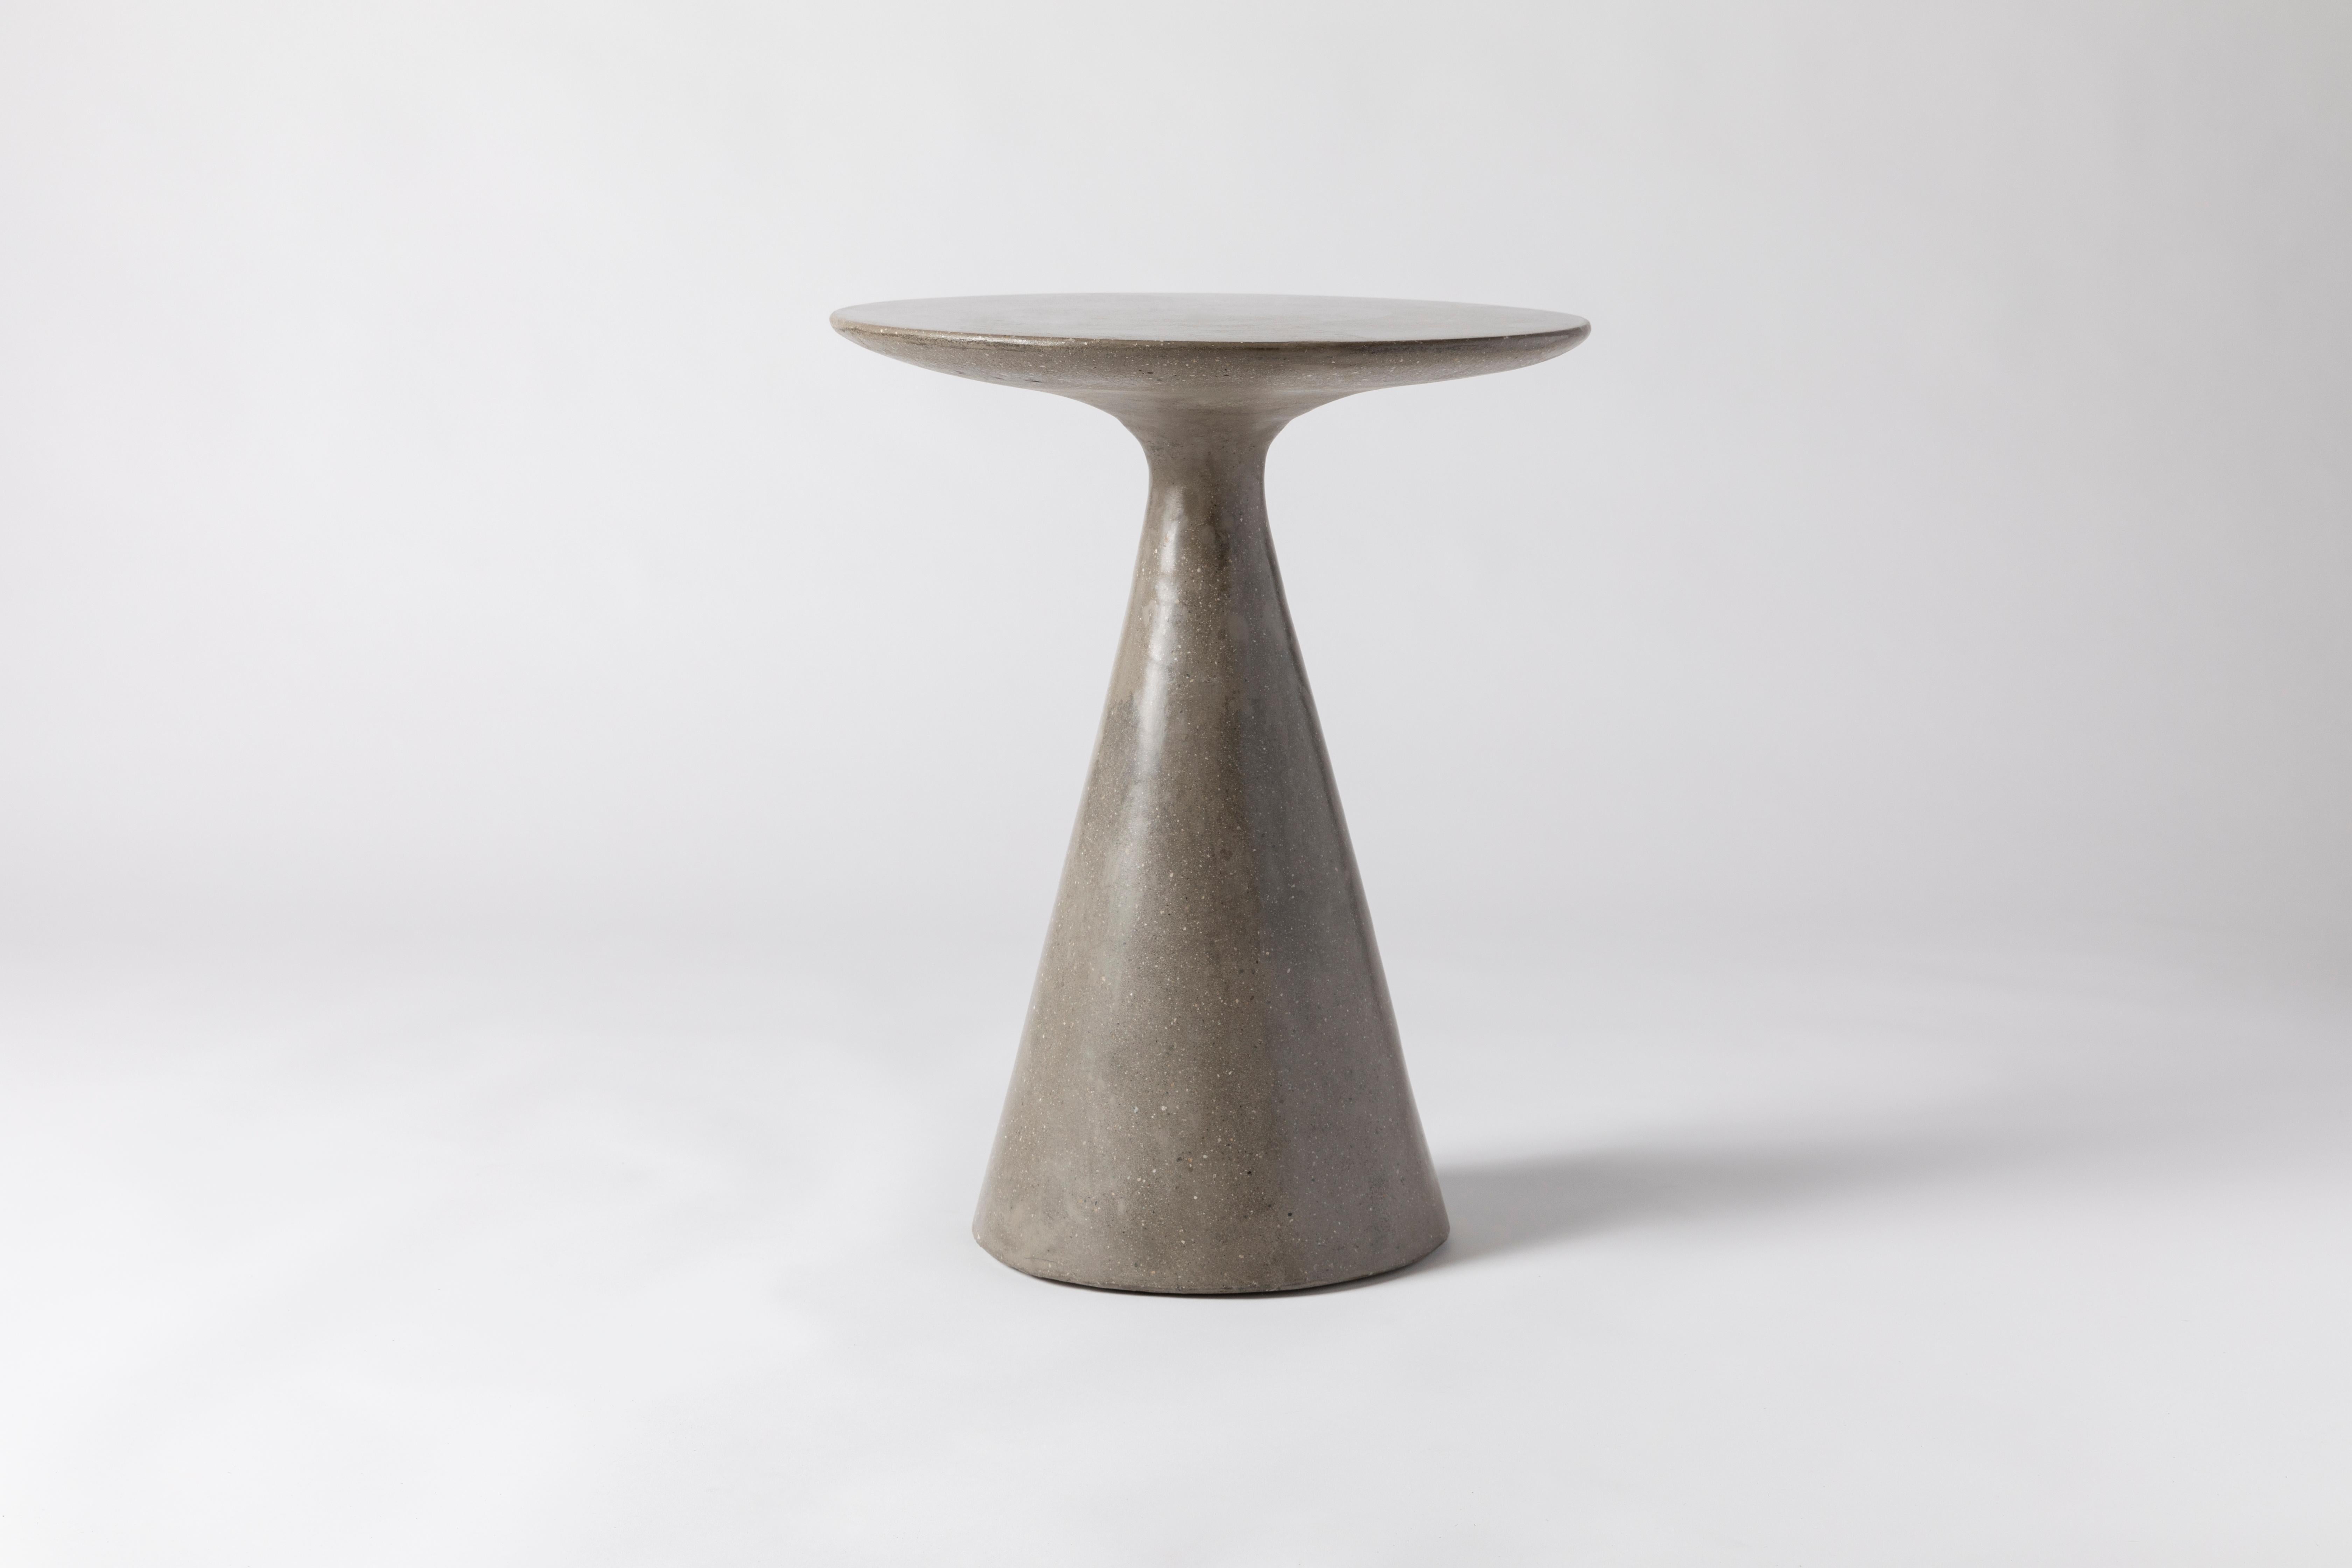 This simple, elegant side table is constructed of one solid piece of concrete. Its low center of gravity offers grounding and stability. This table lends a high level of sophistication to any setting.

Available in color options: Light Grey,